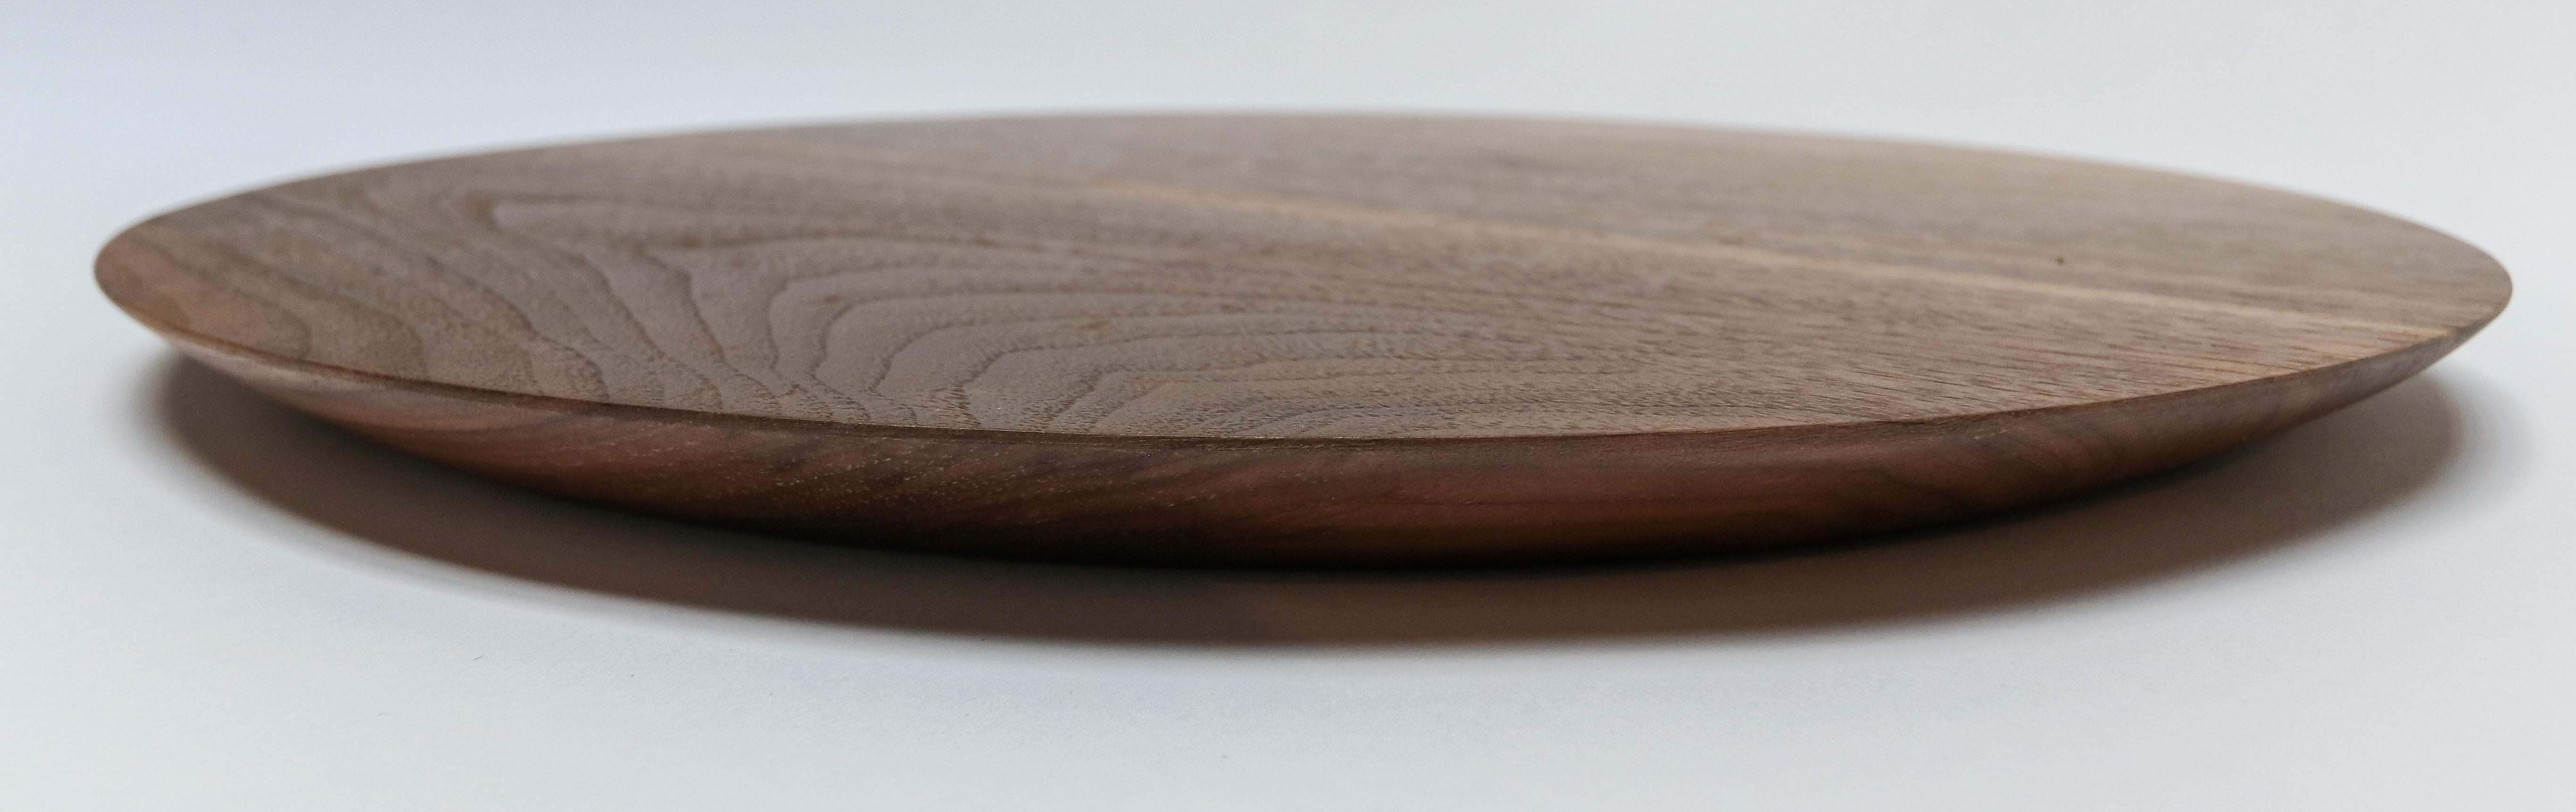 American Custom Medium Round Serving Board in Walnut by Adesso Imports For Sale